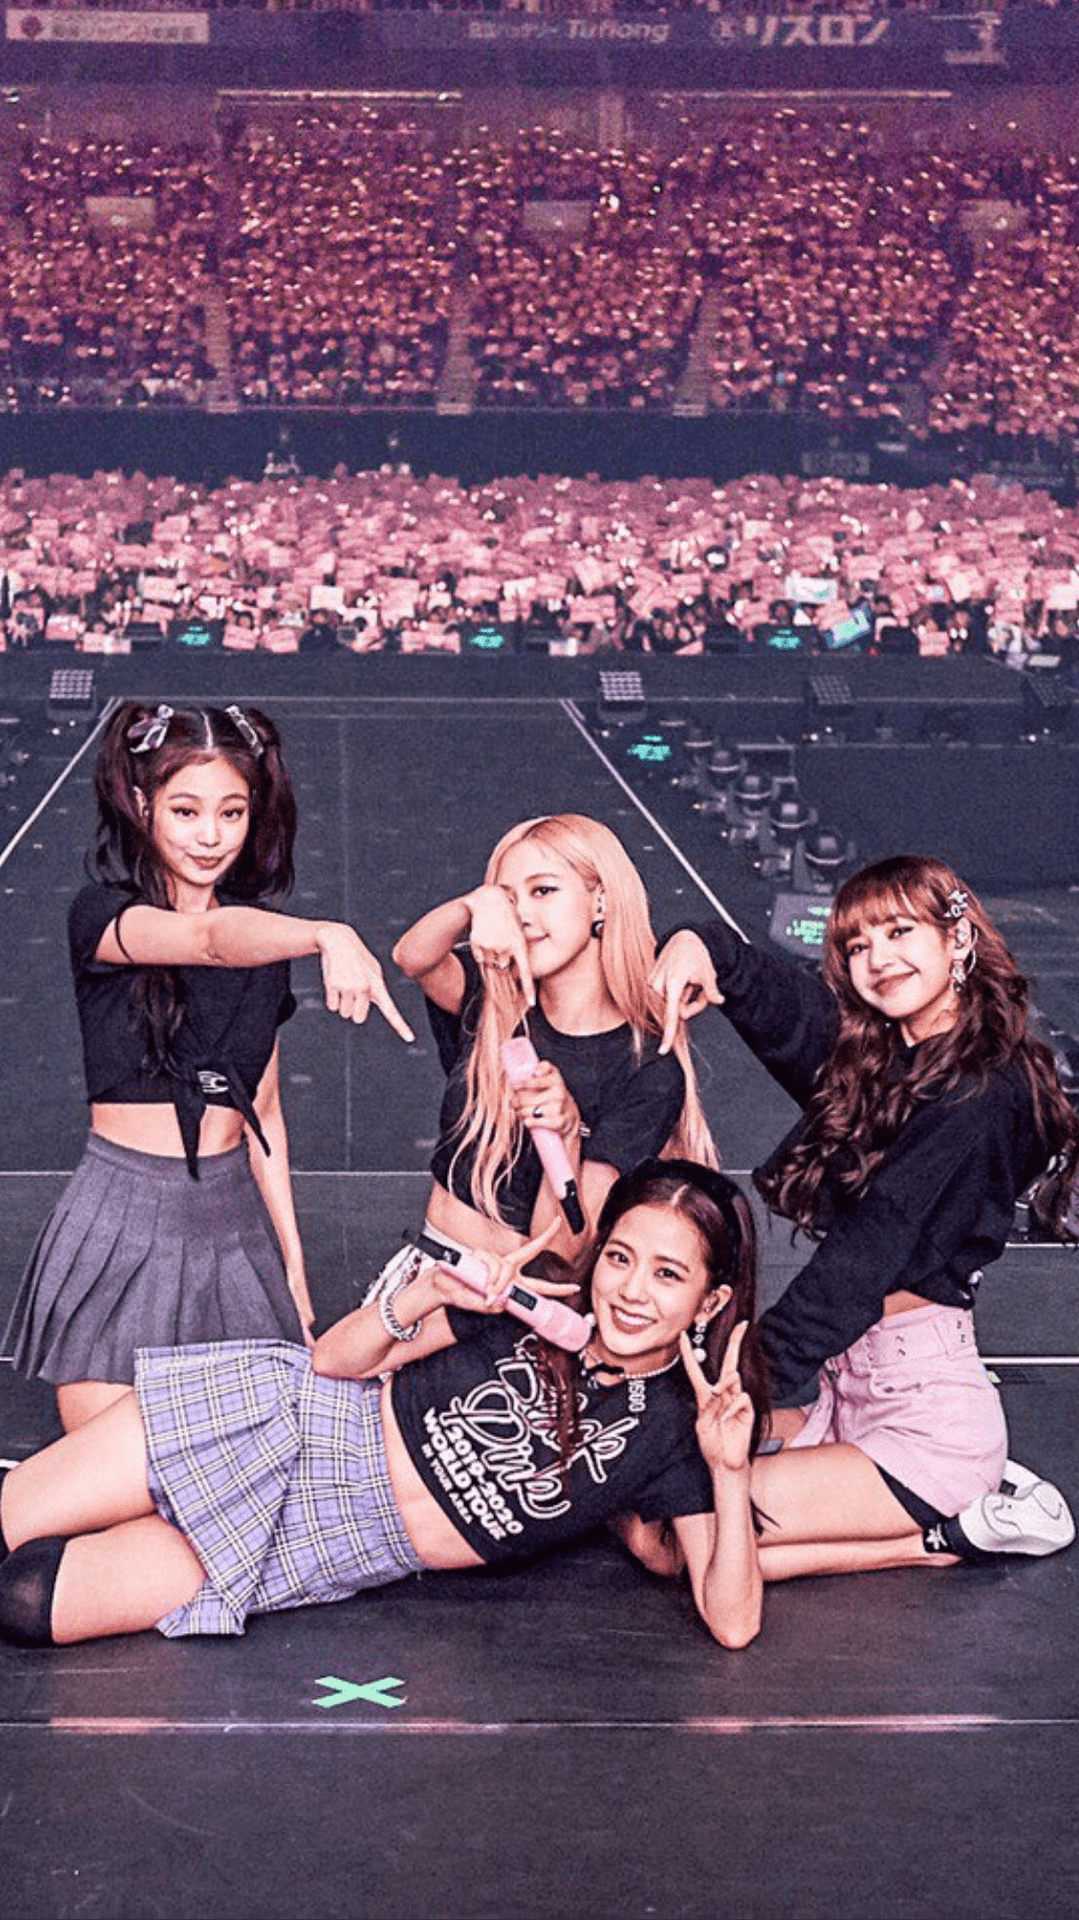 Stellar Style And Energy - Blackpink In Concert